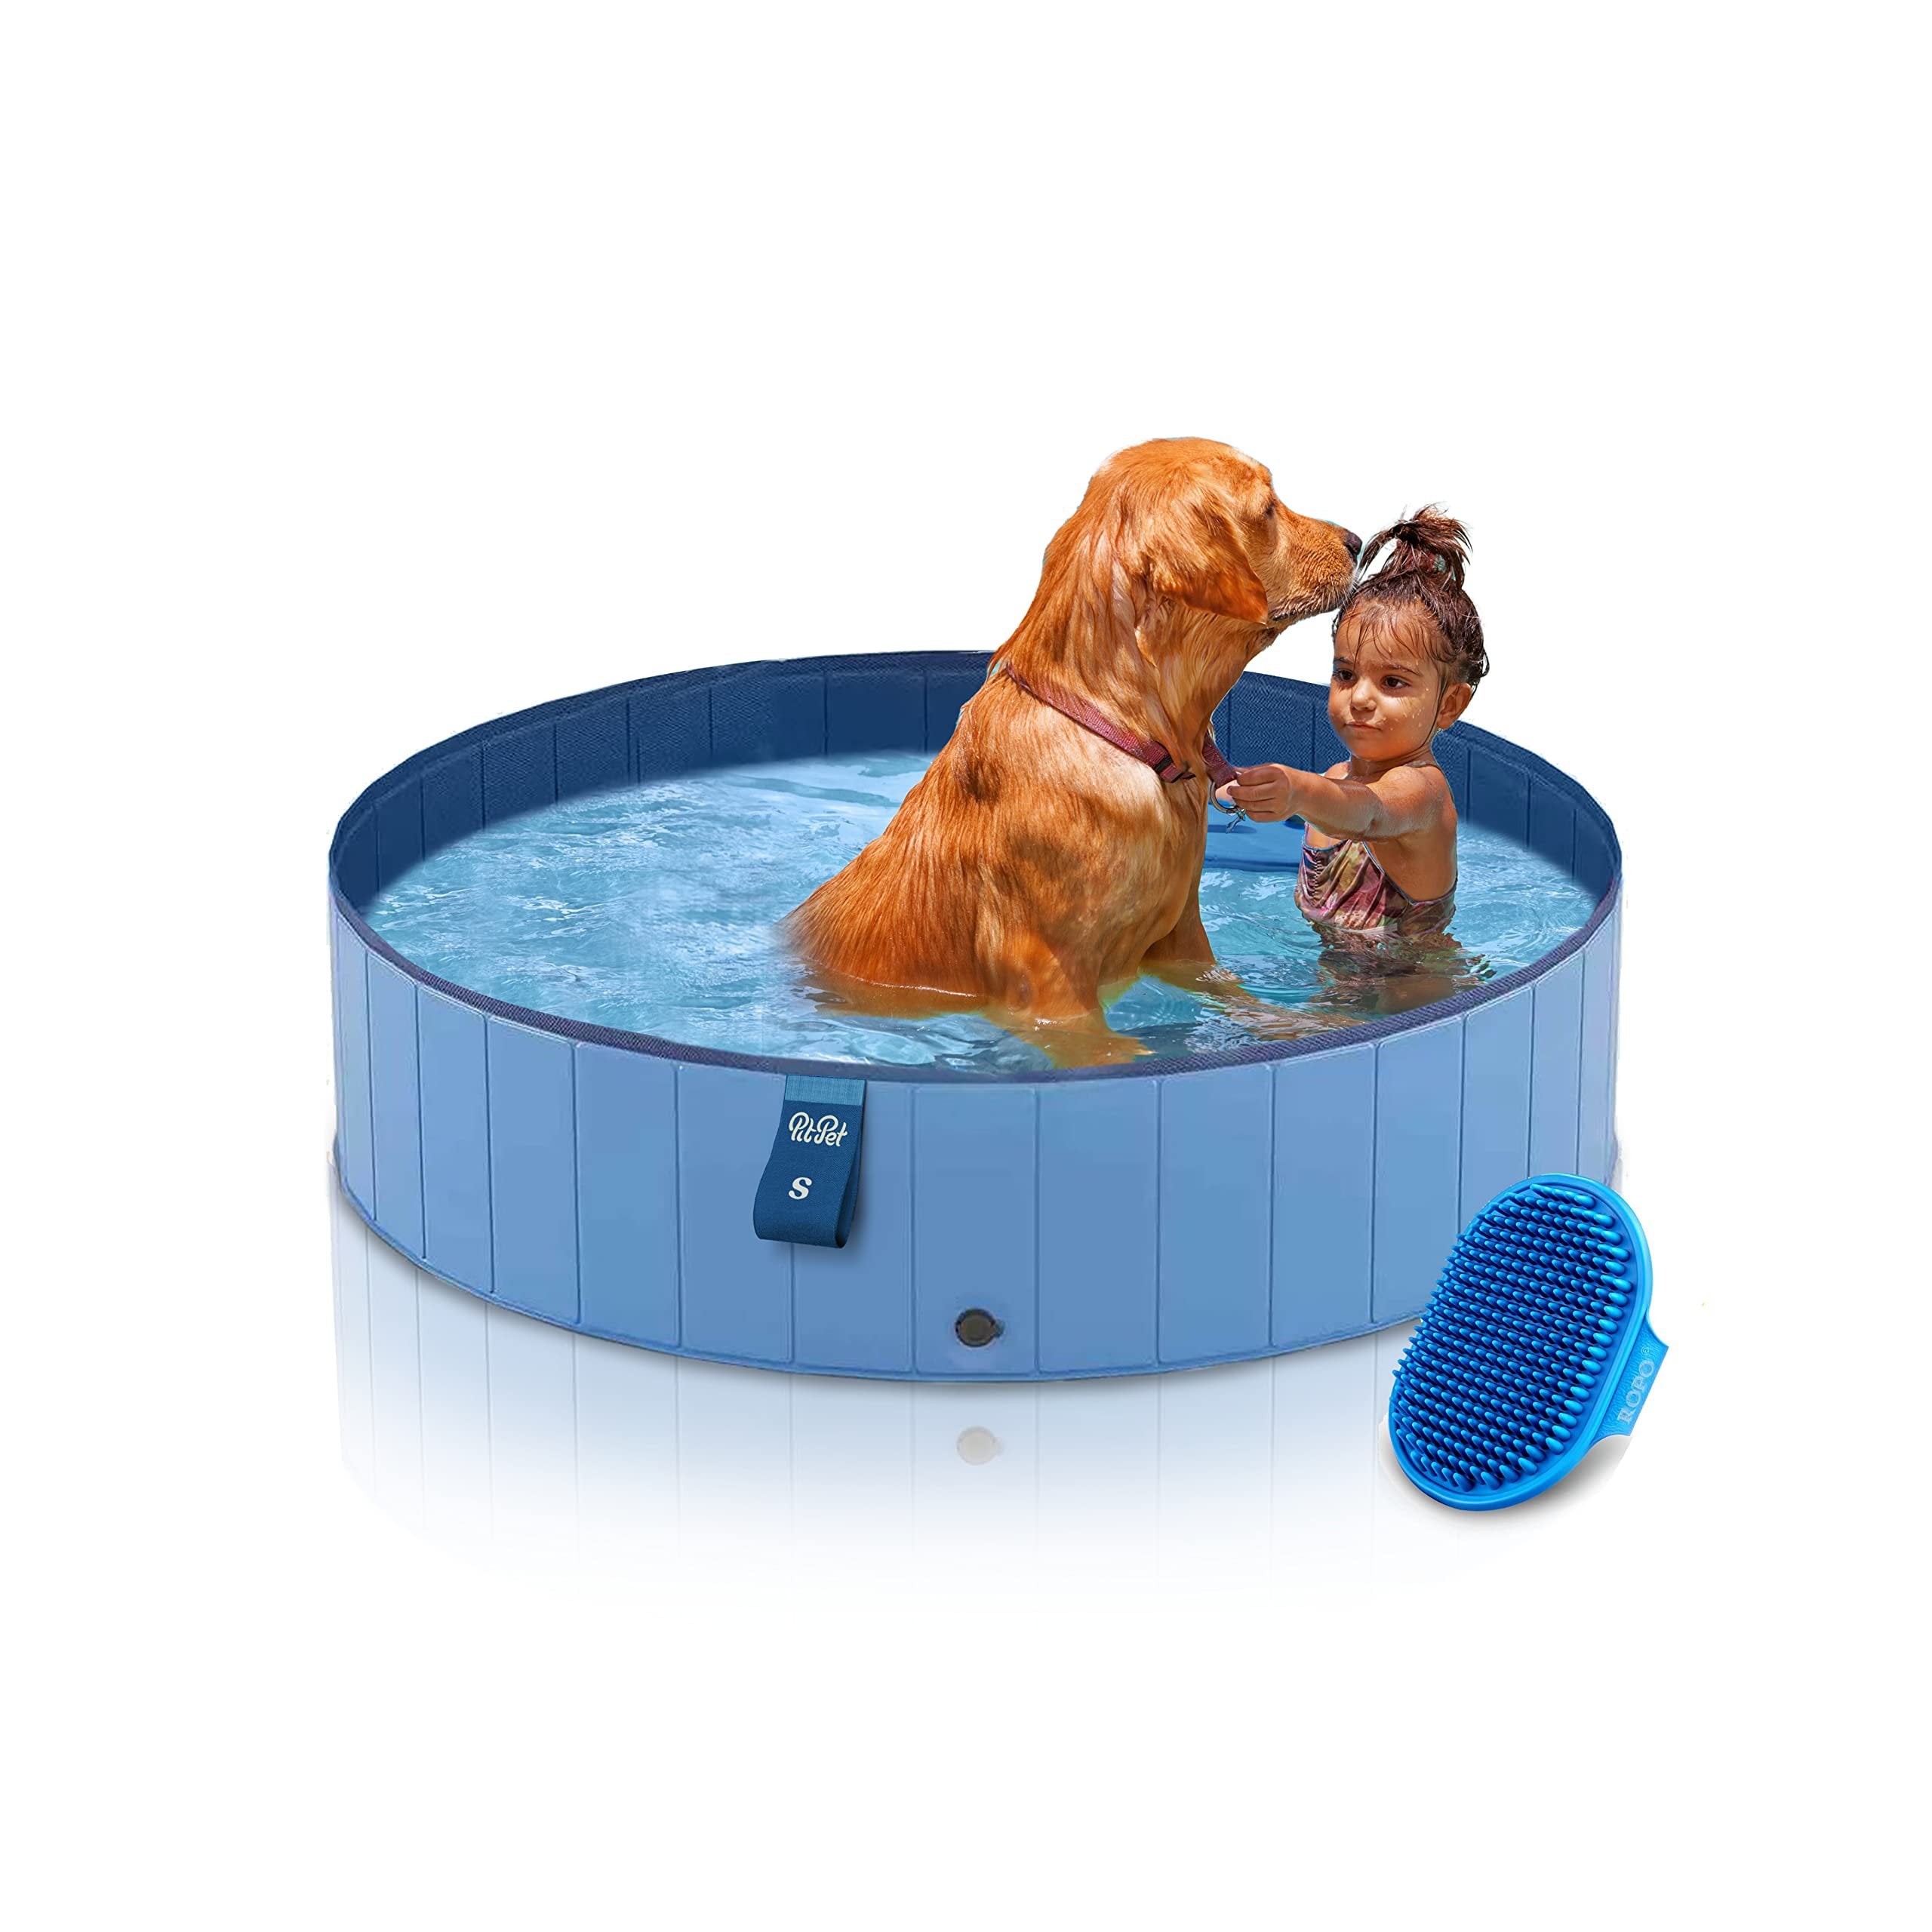 Heavy Duty Foldable Dog Pool for Large Dogs - Collapsible Pet Swimming Pool - Non-Slip Collapsible Dog Pet Pool Bathing Tub - (Small 32" Inches)